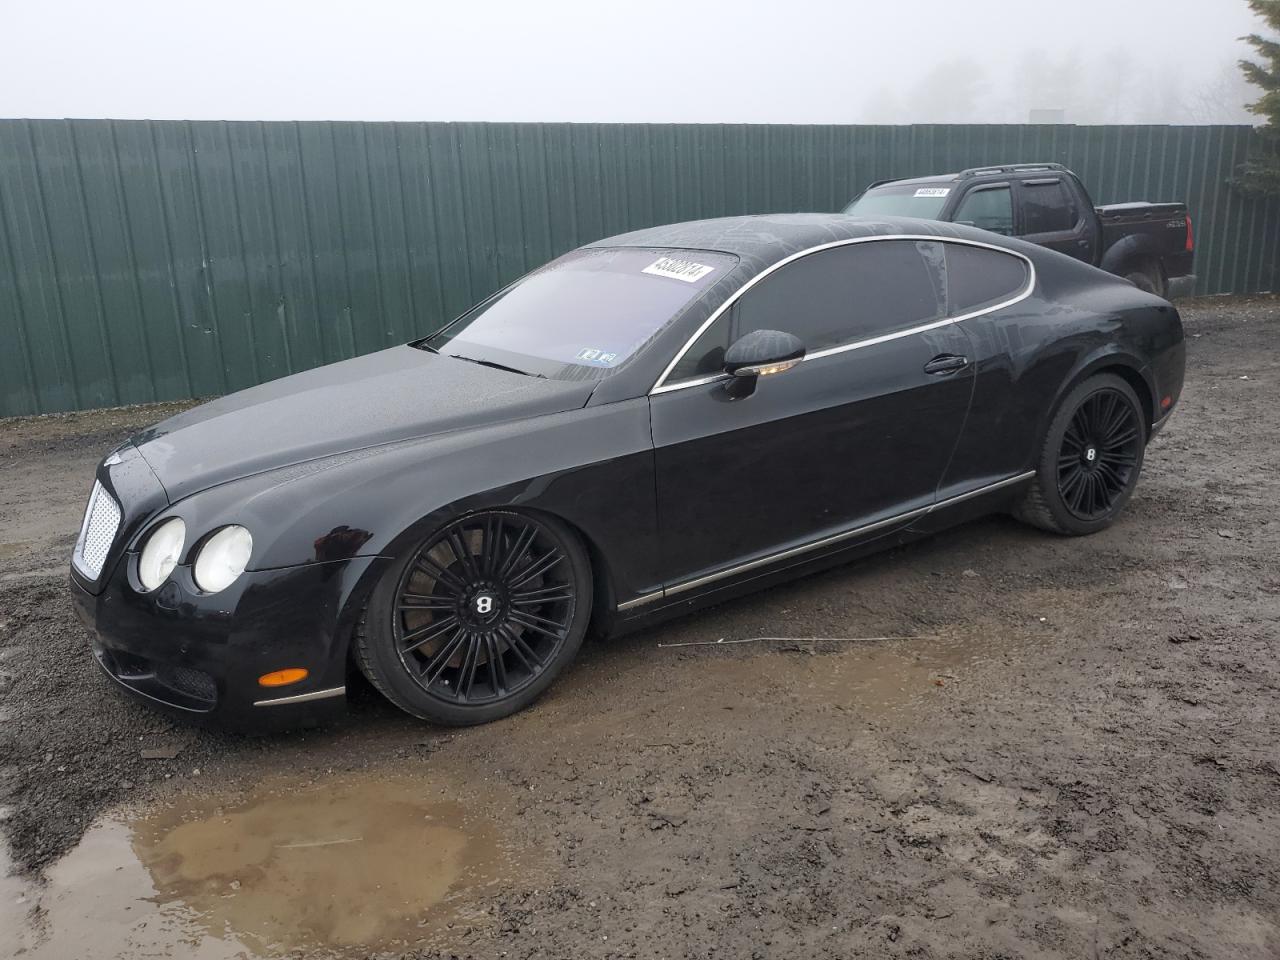 vin: SCBCR63W75C026464 SCBCR63W75C026464 2005 bentley continental 6000 for Sale in 21048 1635, Md - Baltimore, Finksburg, USA